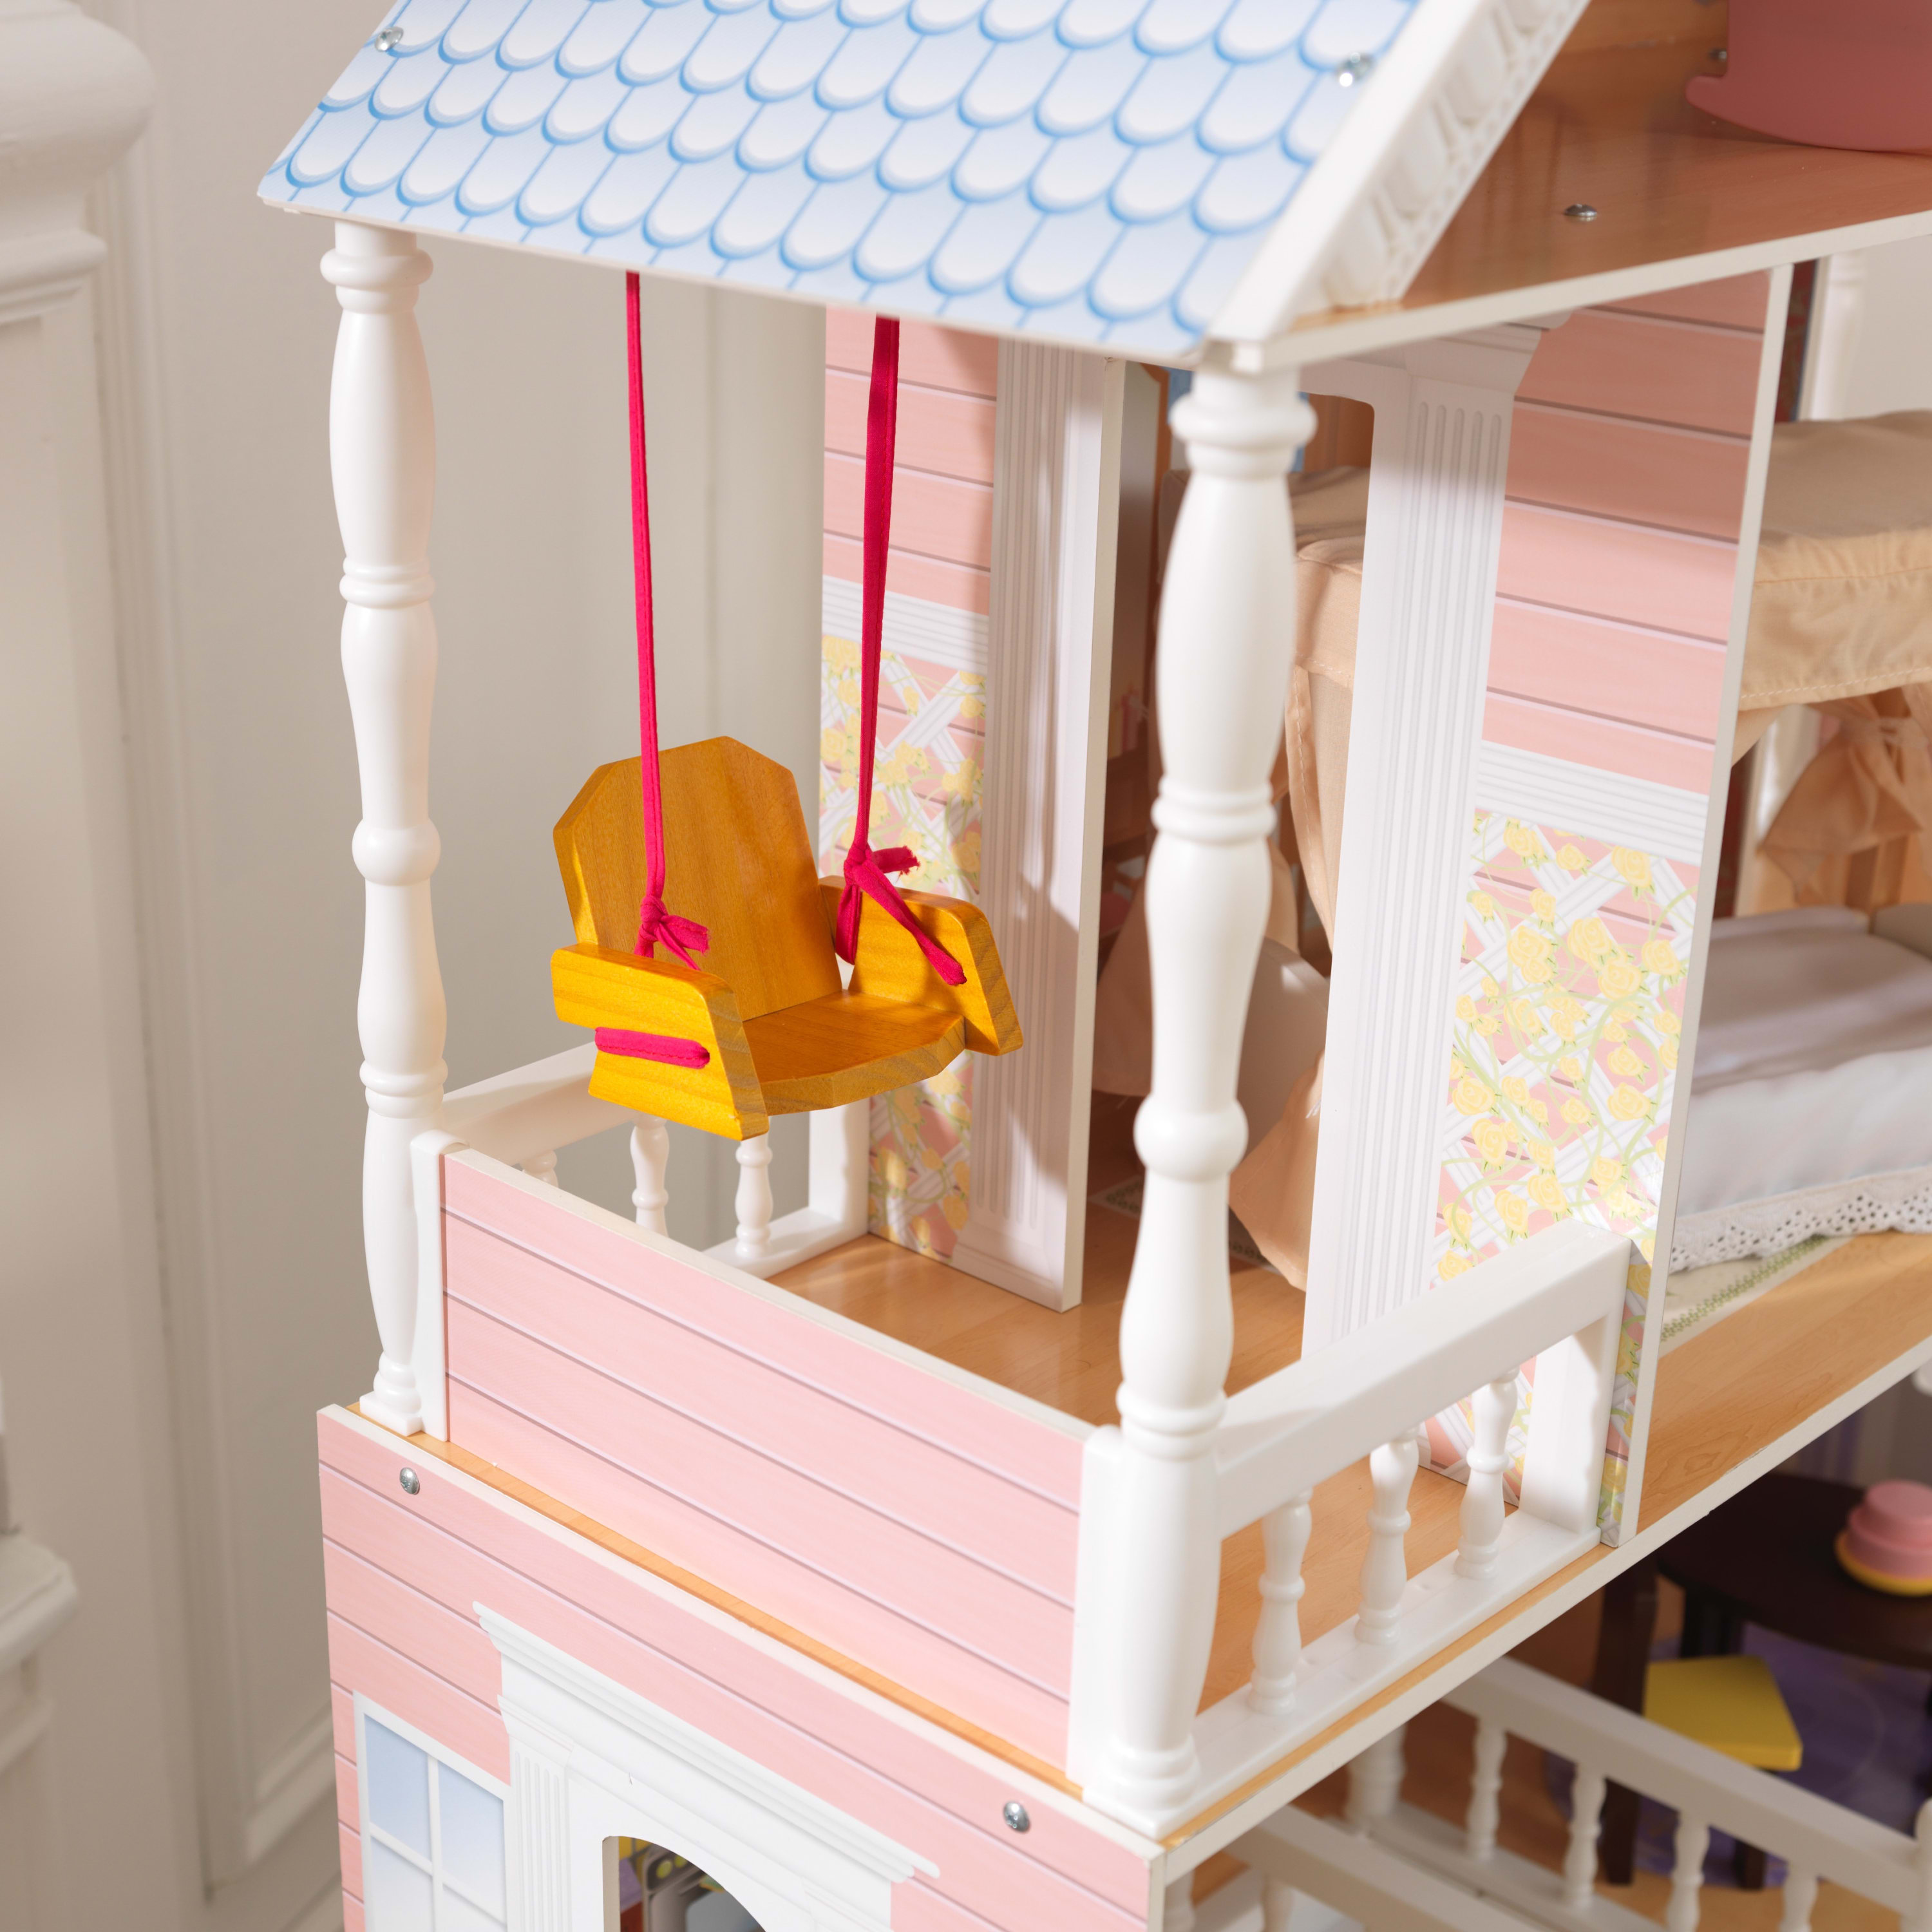 KidKraft Savannah Wooden Dollhouse with Porch Swing and 14 Accessories, Ages 3 and up - image 7 of 10